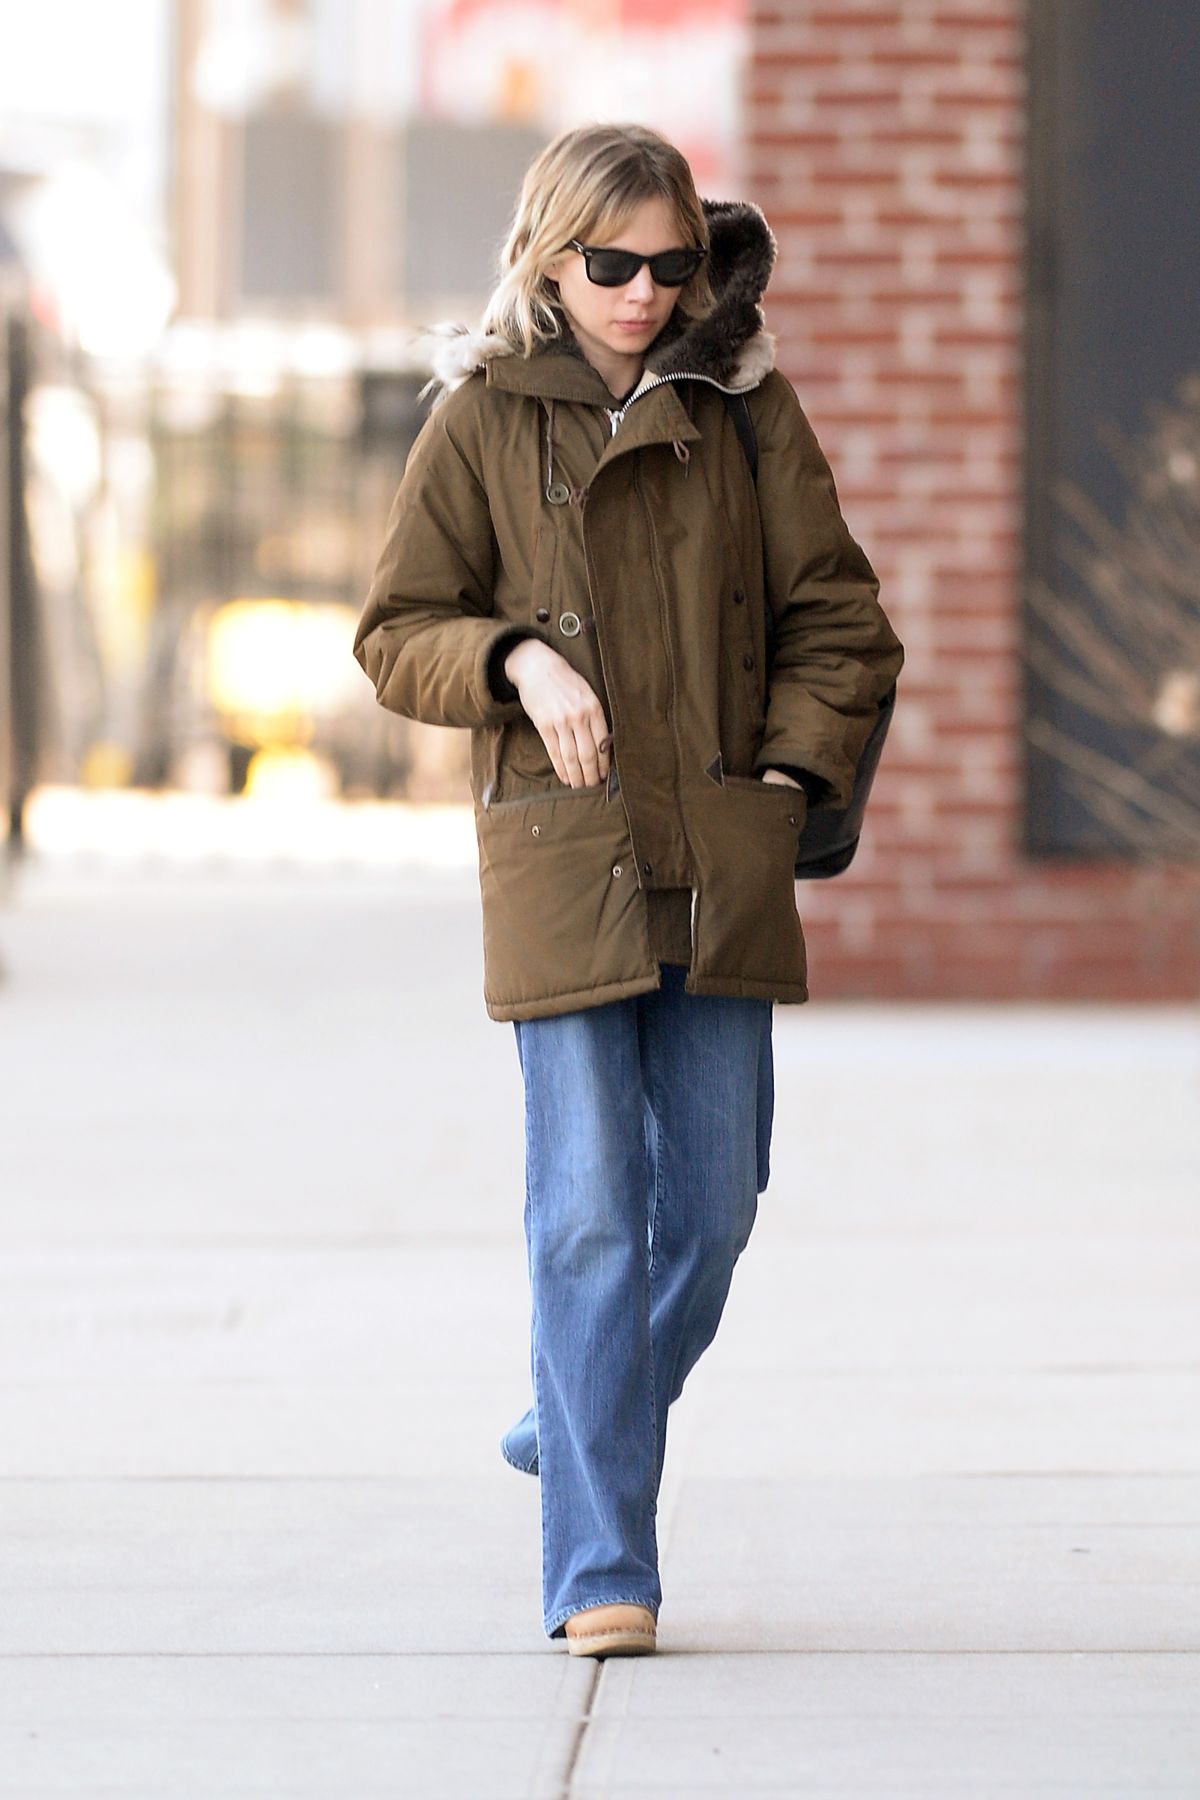 MICHELLE WILLIAMS Out and About in Brooklyn 03/07/2016 – HawtCelebs